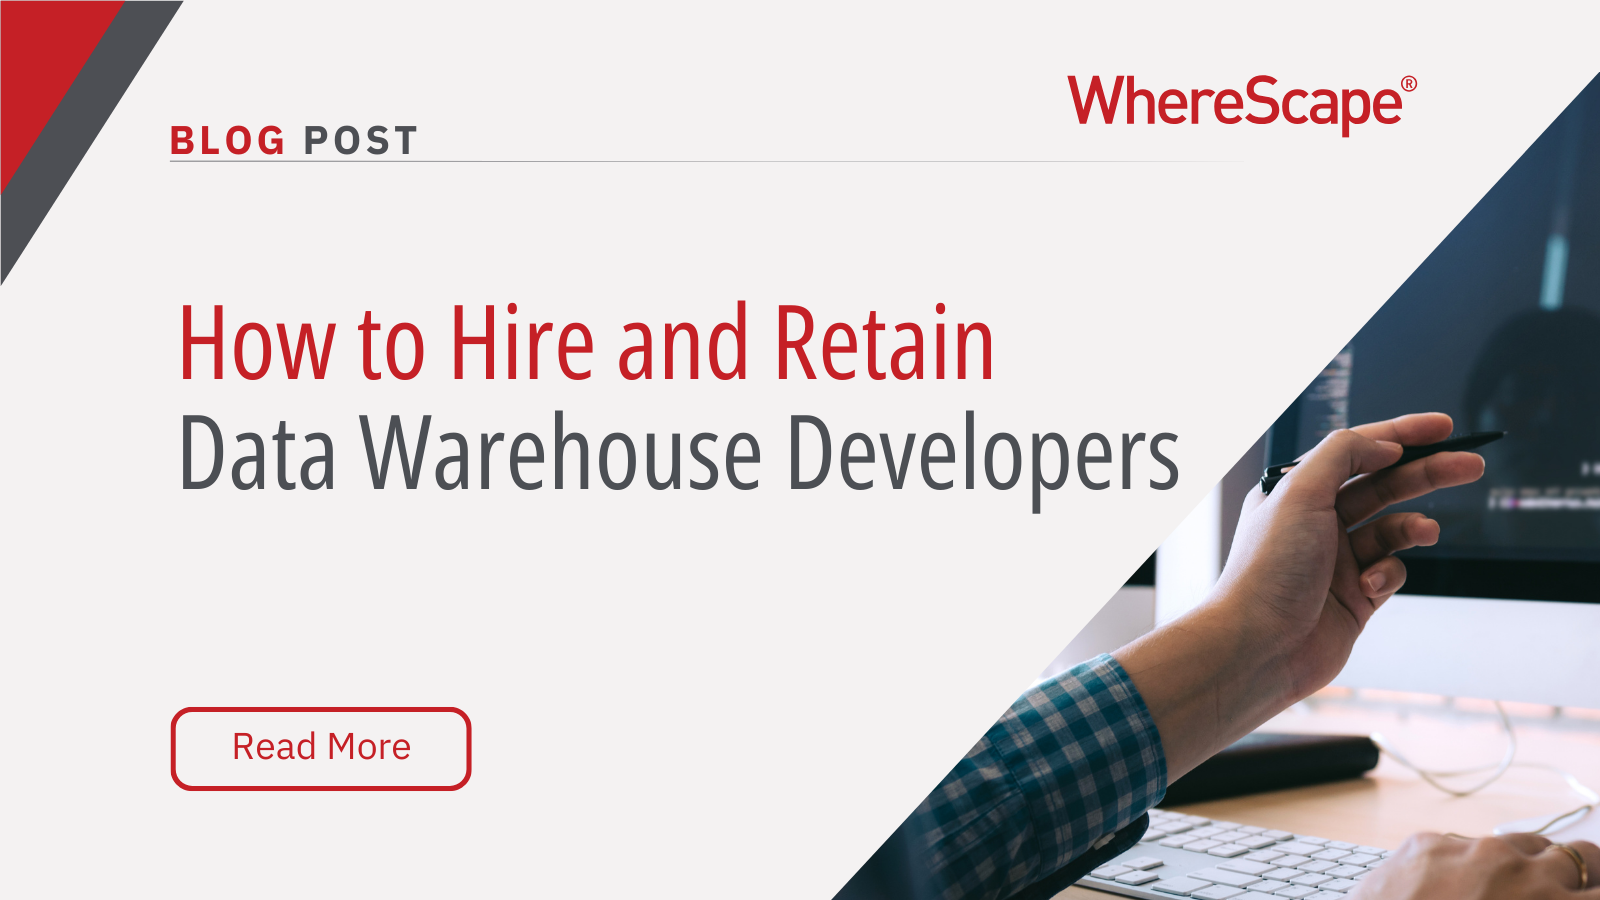 How to Hire and Retain Data Warehouse Developers